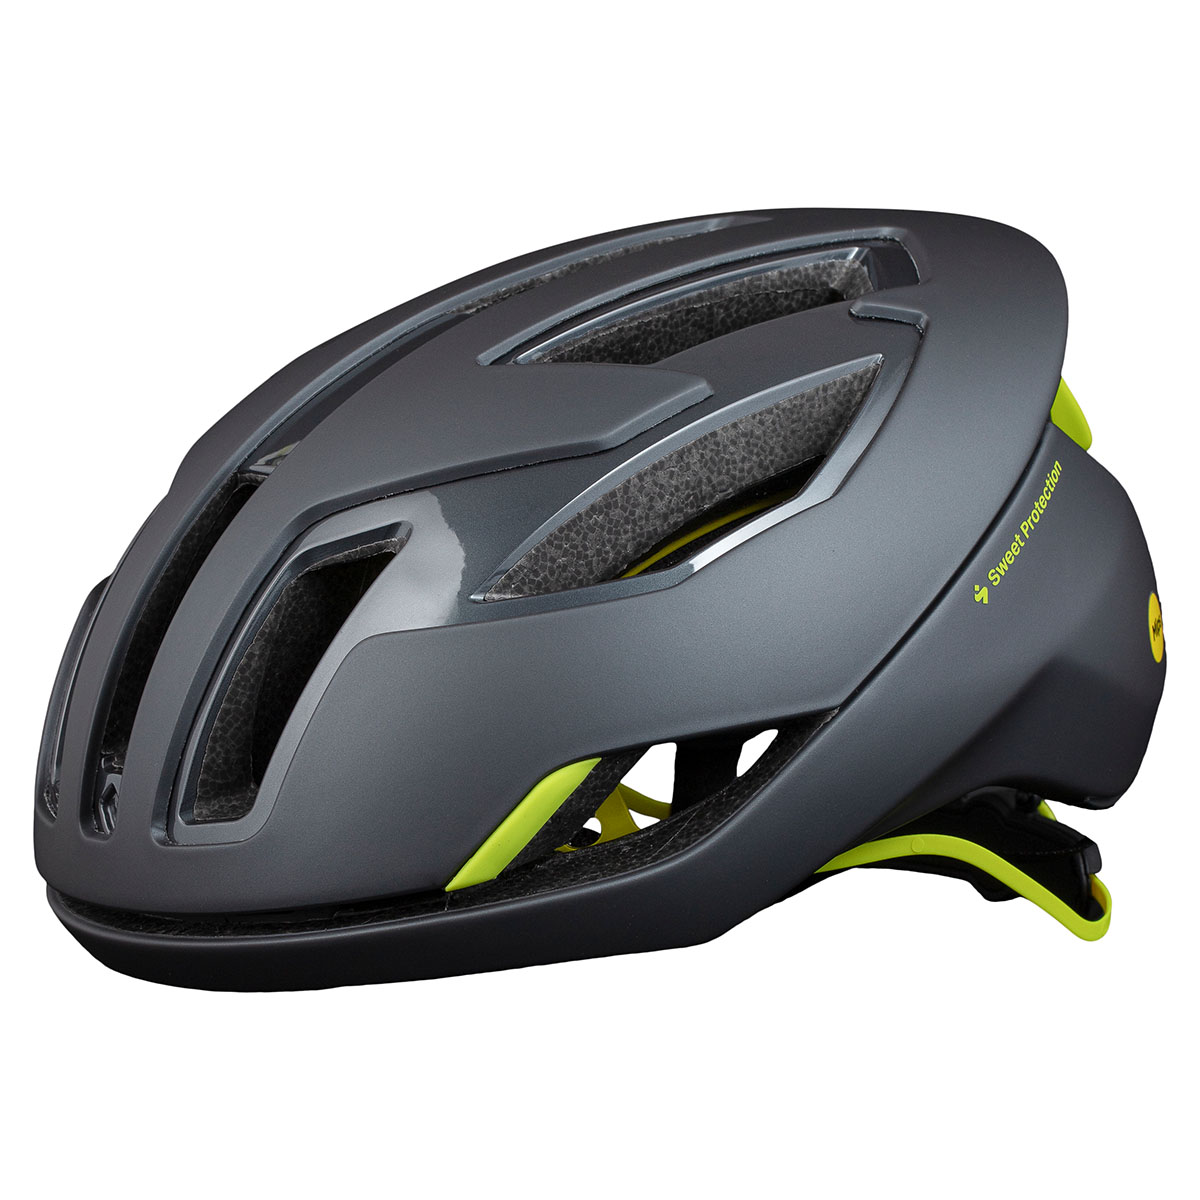 CASQUE SWEET PROTECTION FALCONER MIPS GRIS/JAUNE FLUO LARGE